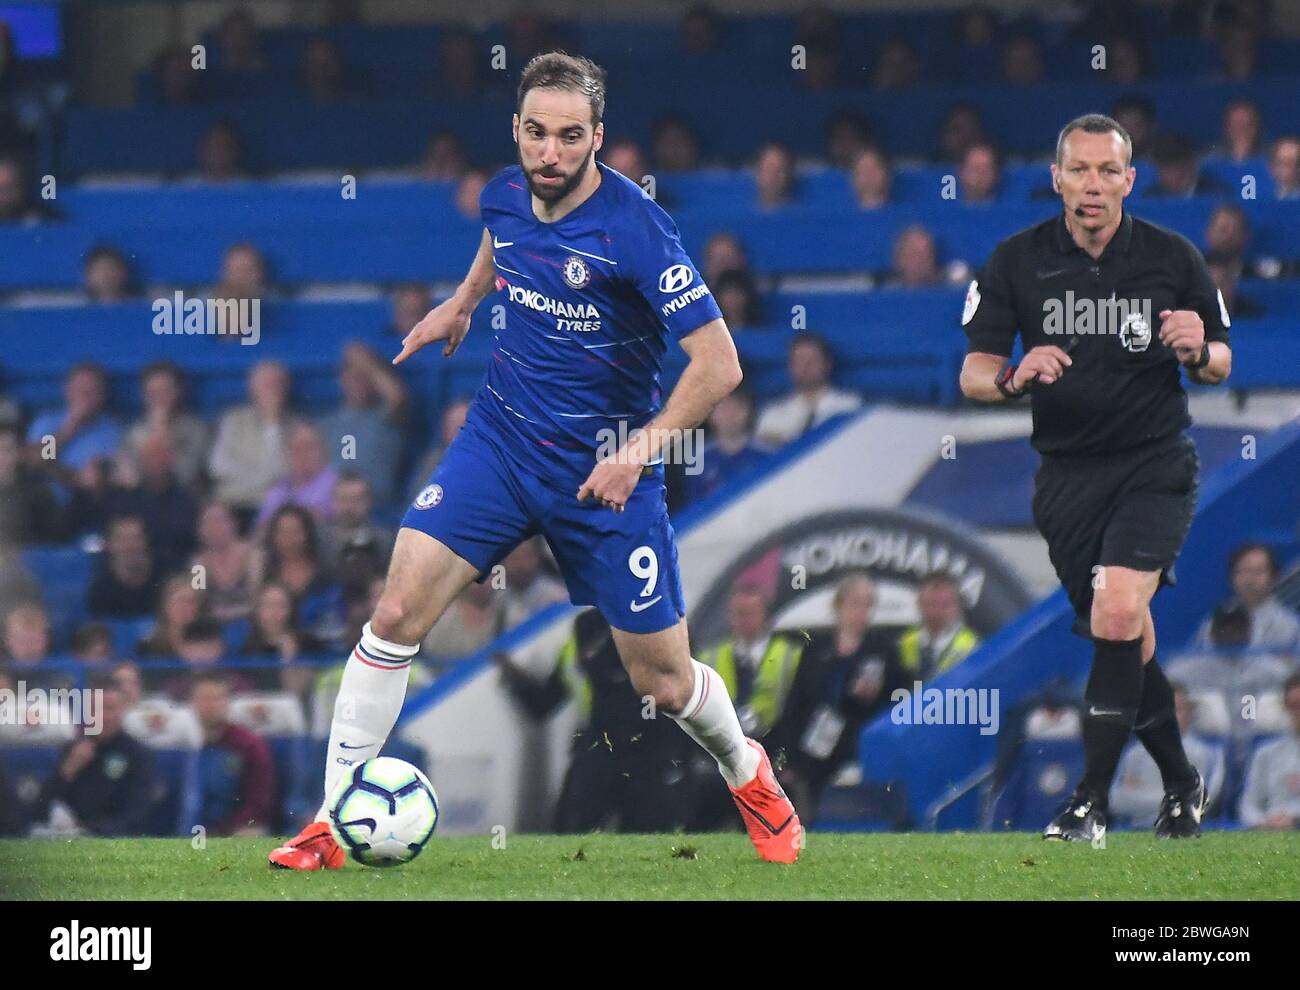 LONDON, ENGLAND - APRIL 22, 2019: Gonzalo Higuain of Chelsea pictured during the 2018/19 Premier League game between Chelsea FC and Burnley FC at Stamford Bridge. Stock Photo